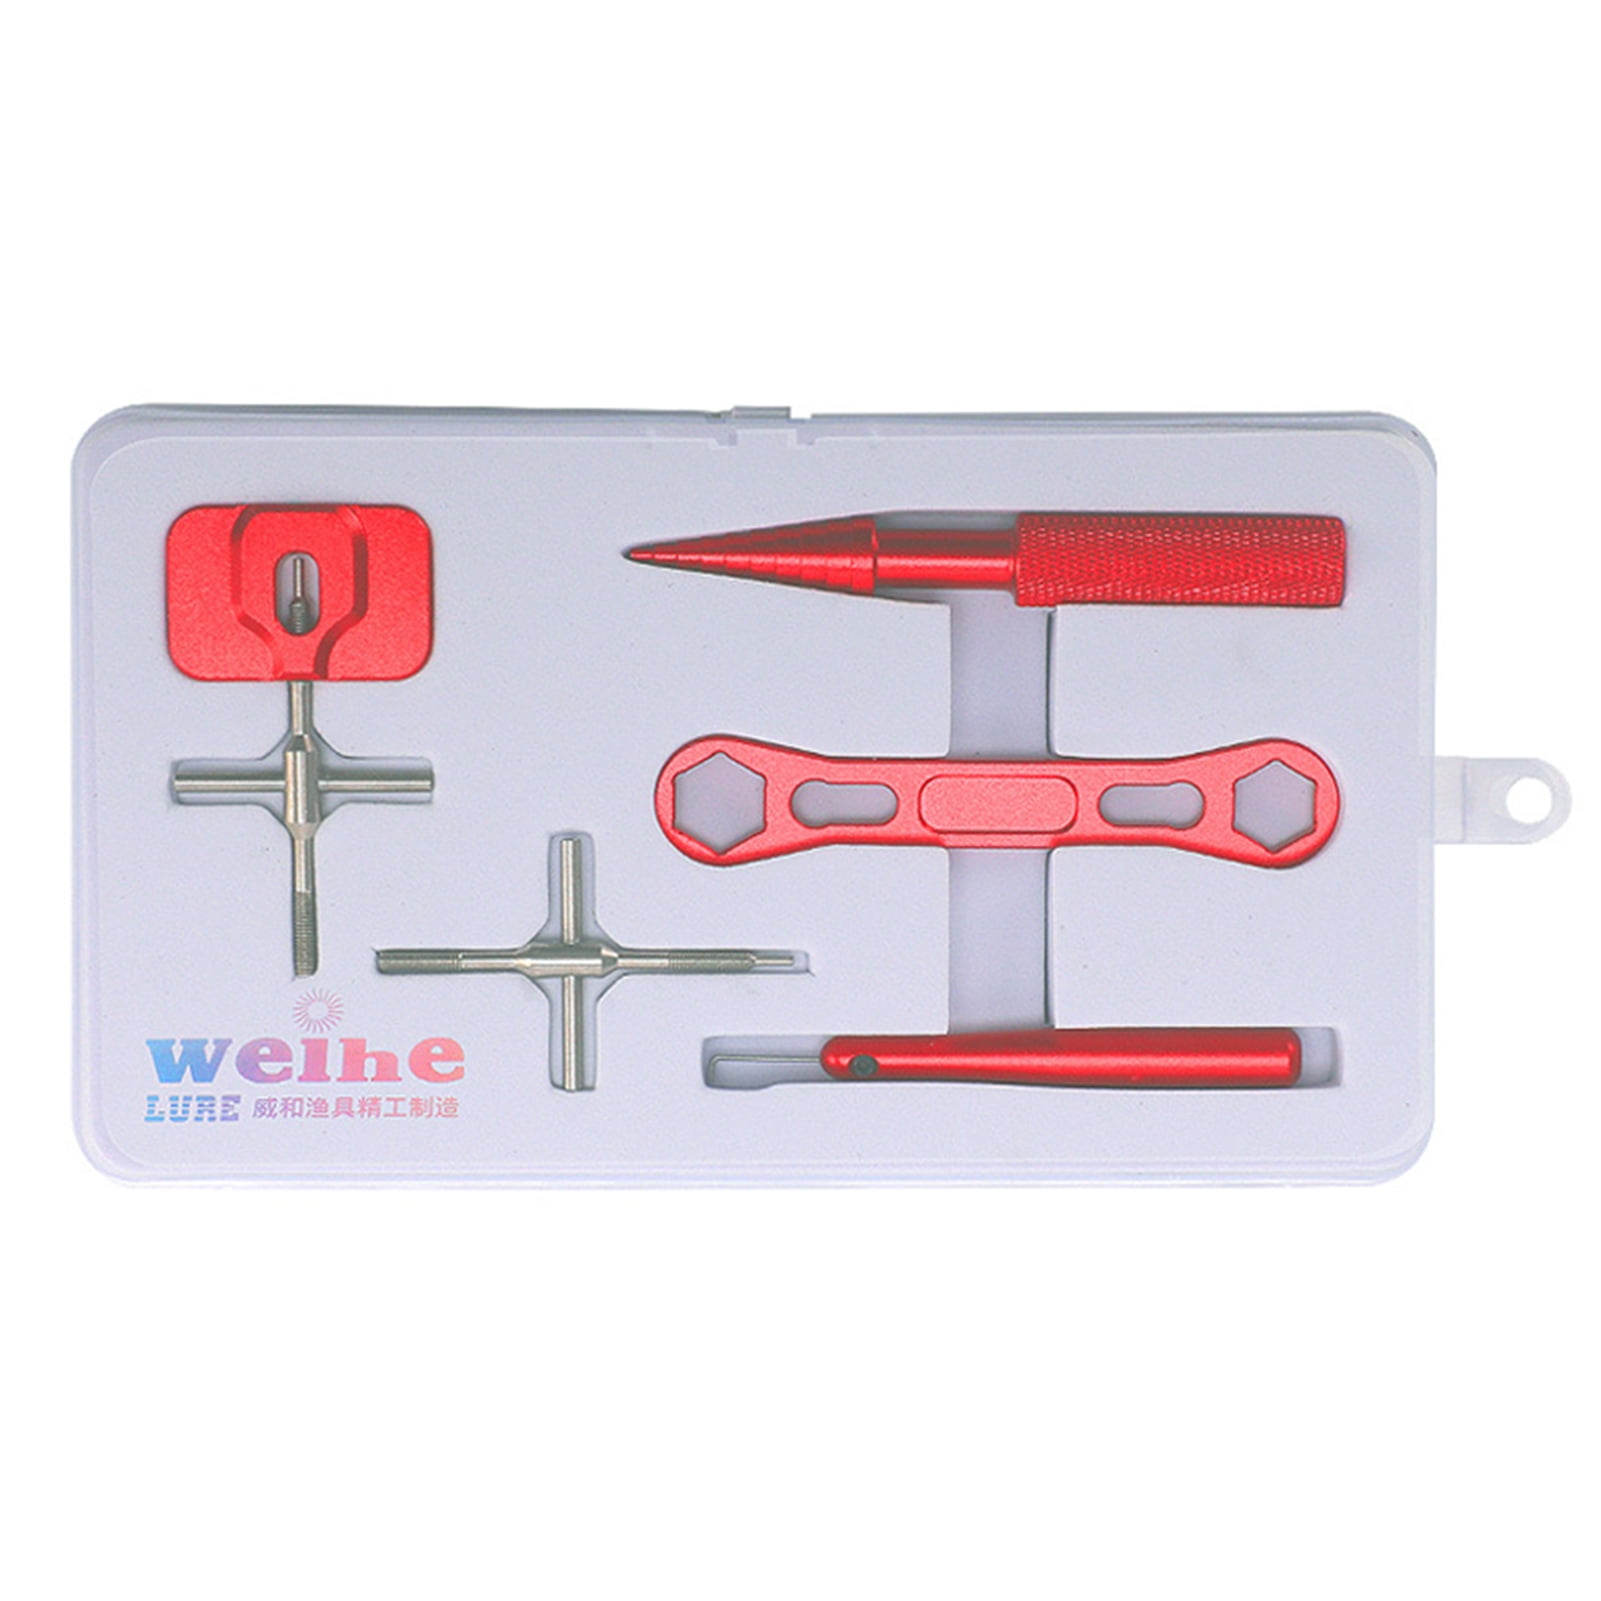 Weihe Maintenance Kit for Baitcasting Fishing Reels - Keep Your Gear in Top Shape, Size: 10.0, Red